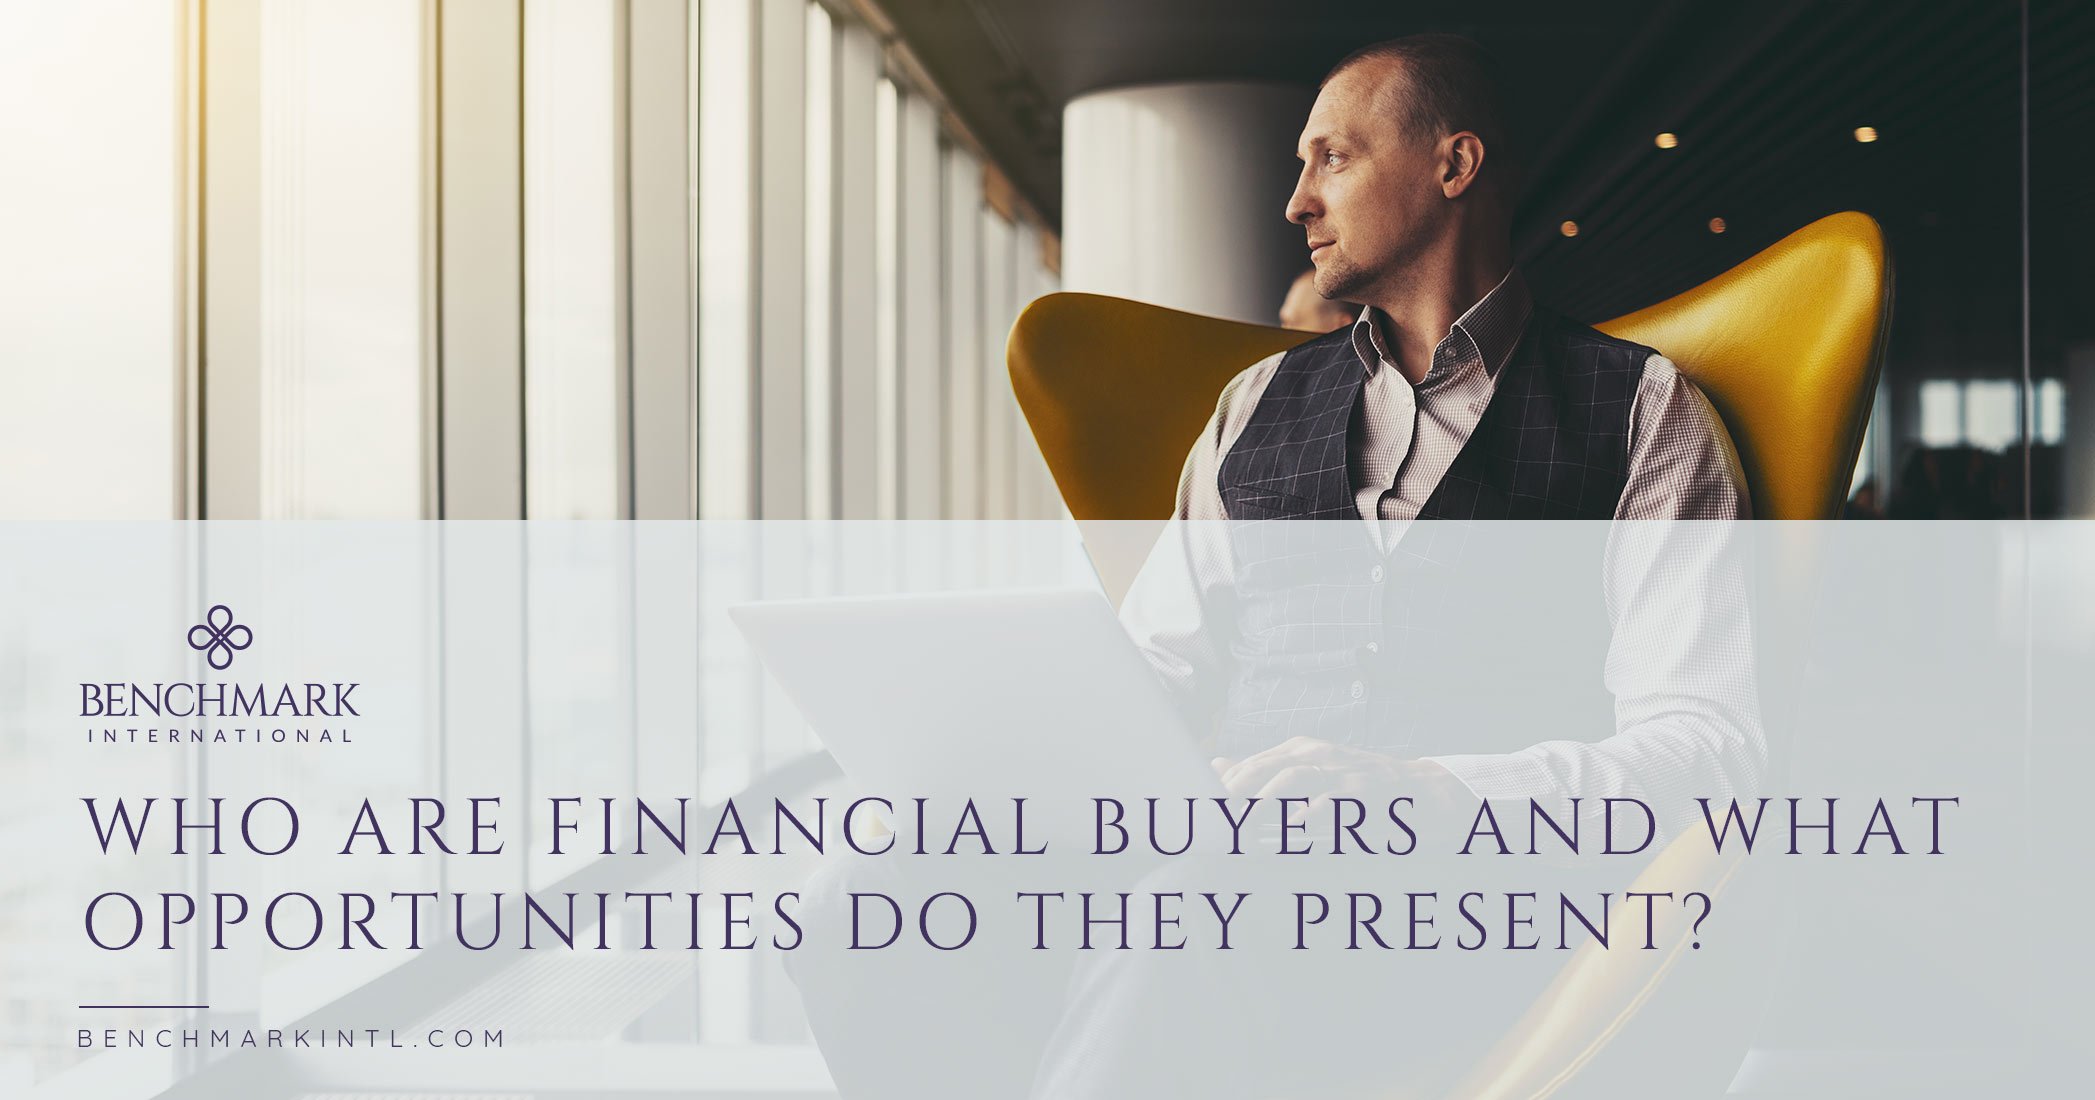 Who Are Financial Buyers and What Opportunities Do They Present?